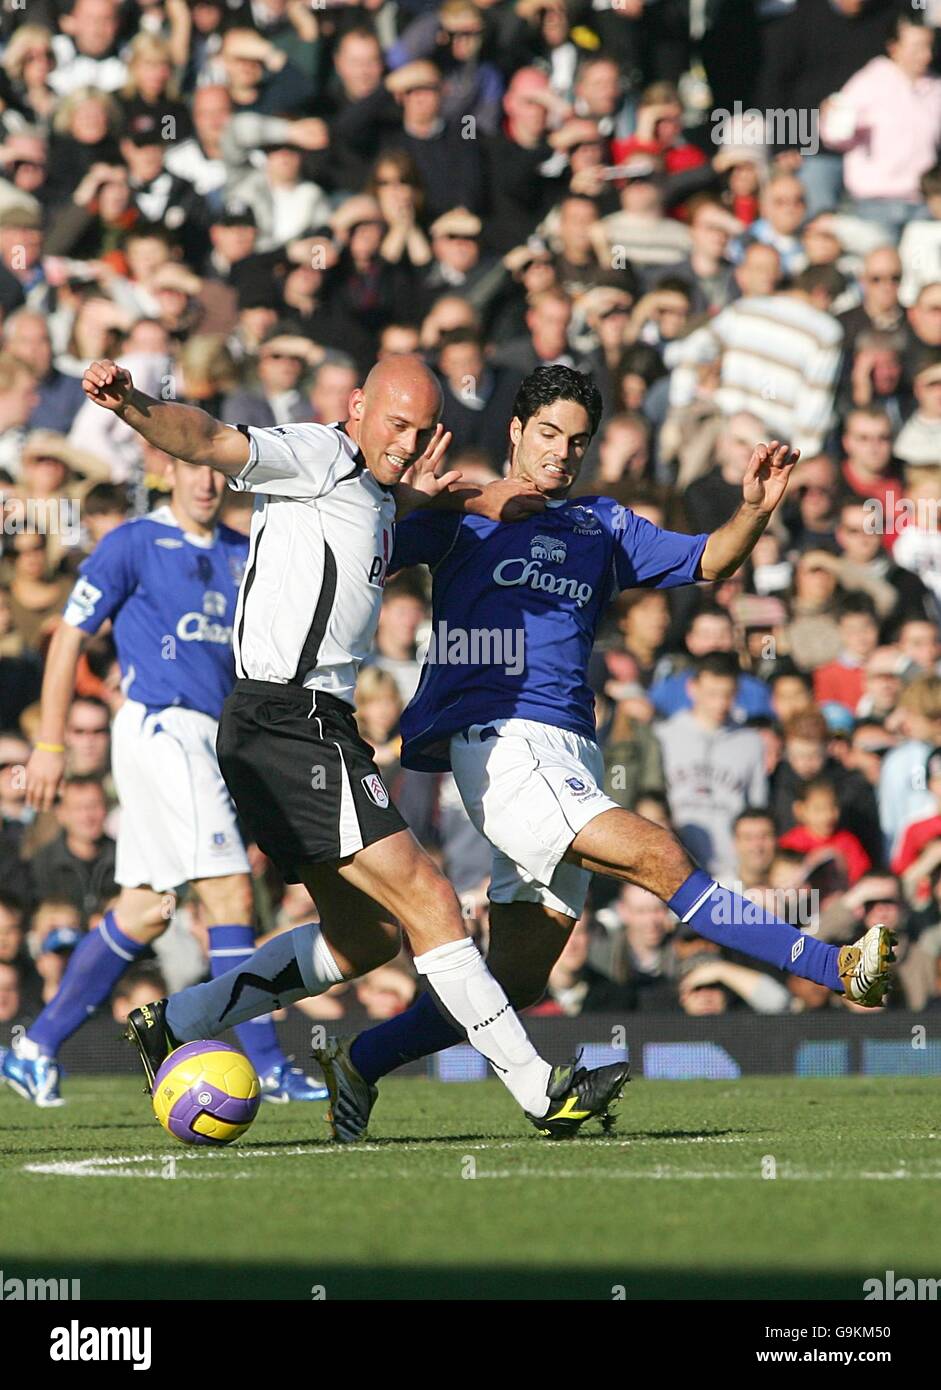 Soccer - FA Barclays Premiership - Fulham v Everton - Craven Cottage. Fulham's Claus Jensen and Everton's Mikel Arteta battle for the ball Stock Photo